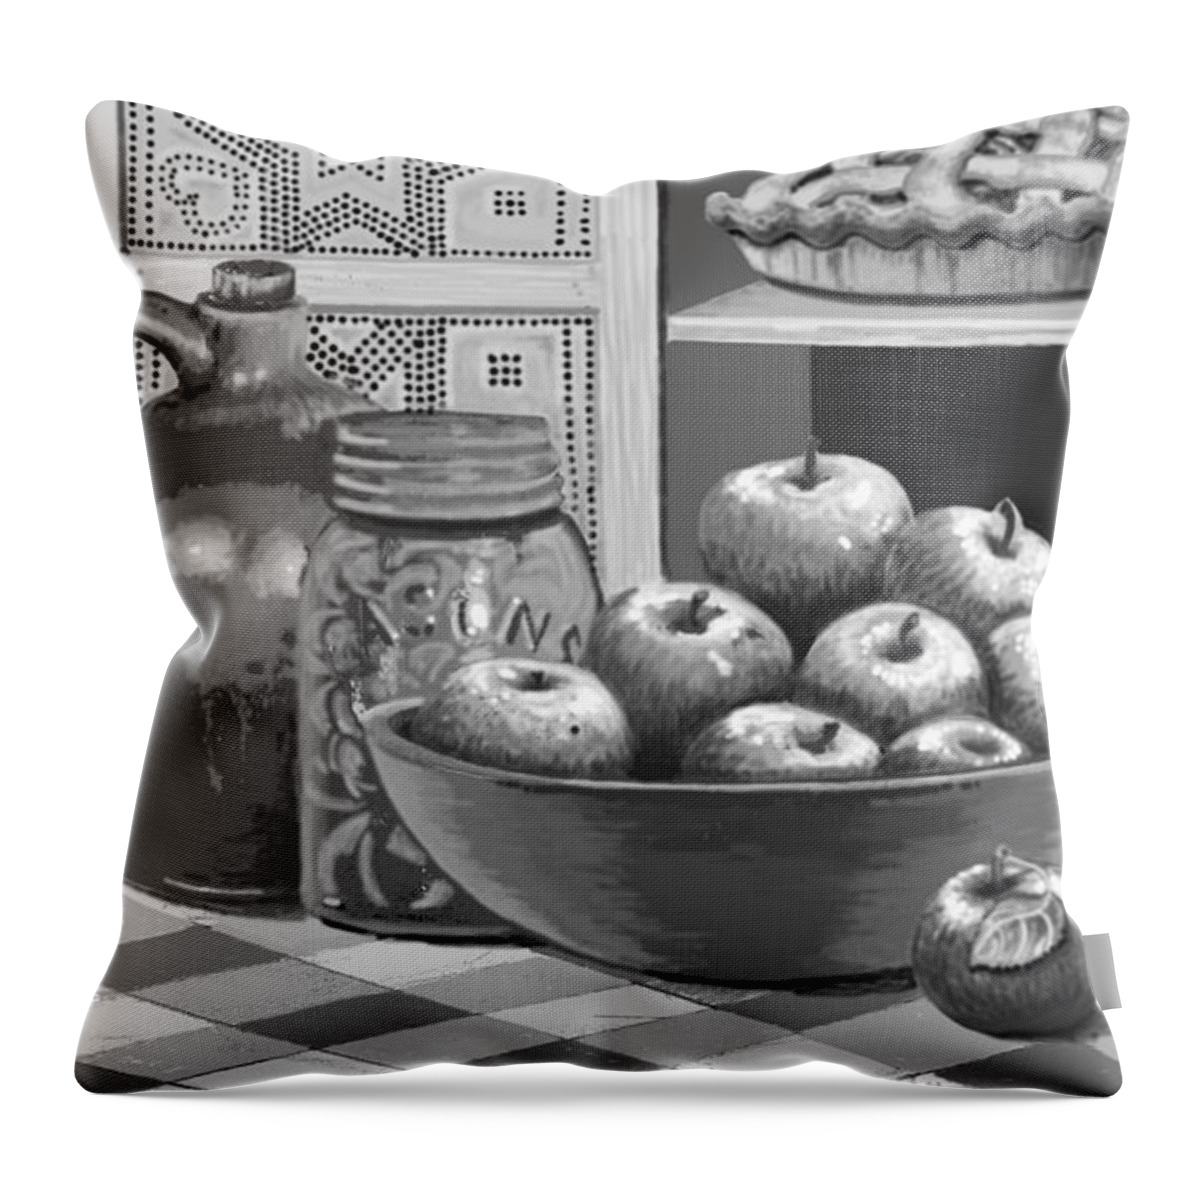 Apples Throw Pillow featuring the digital art Apples Four Ways by Carol Jacobs